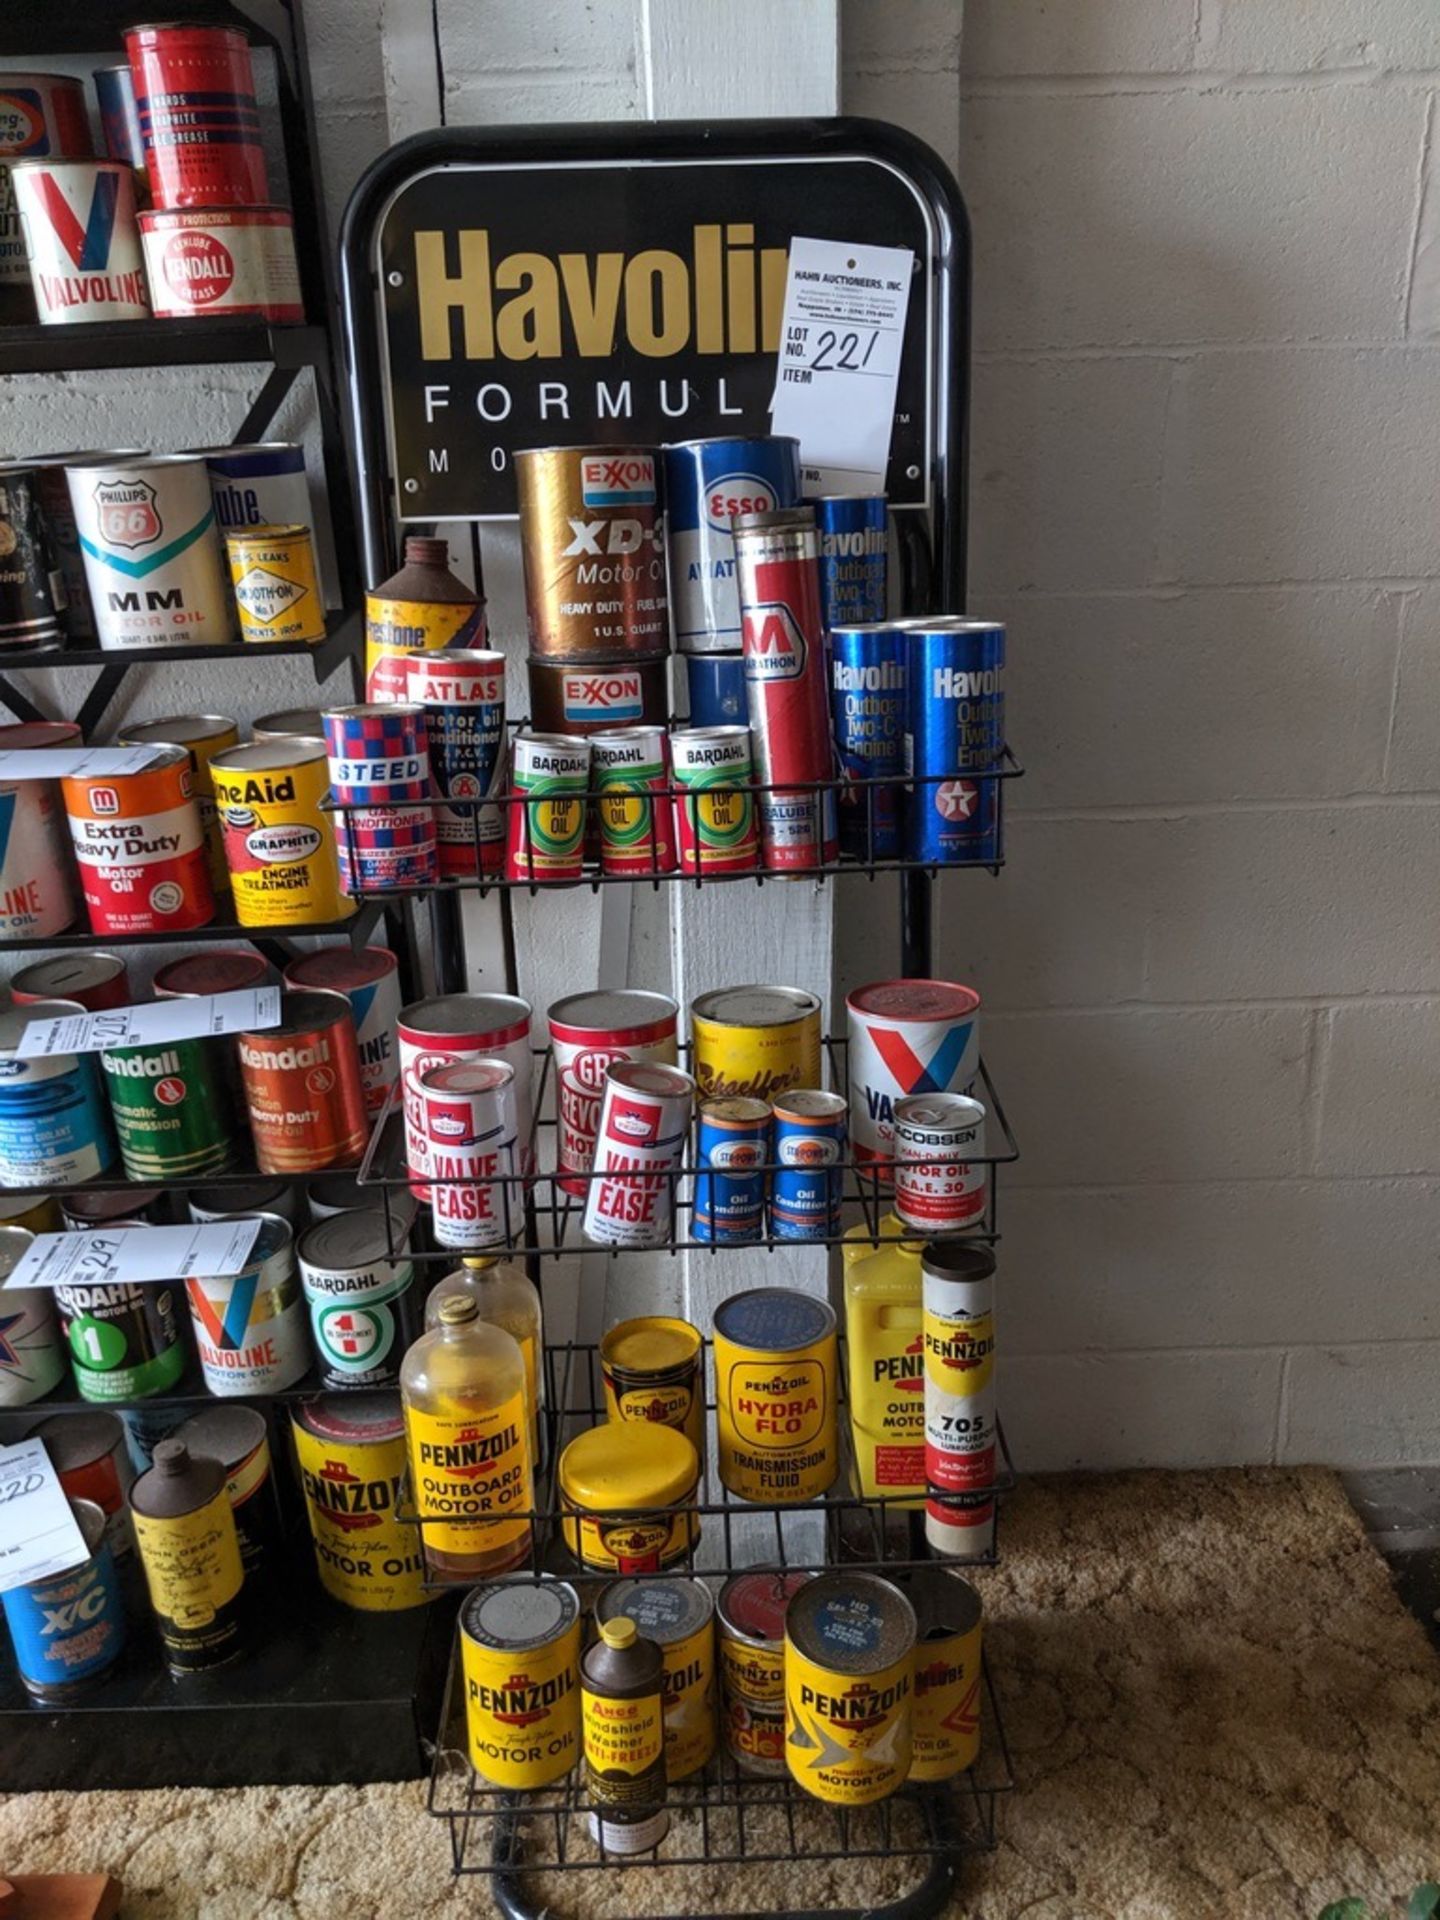 Havoline Display Rack and Contents - Image 2 of 2